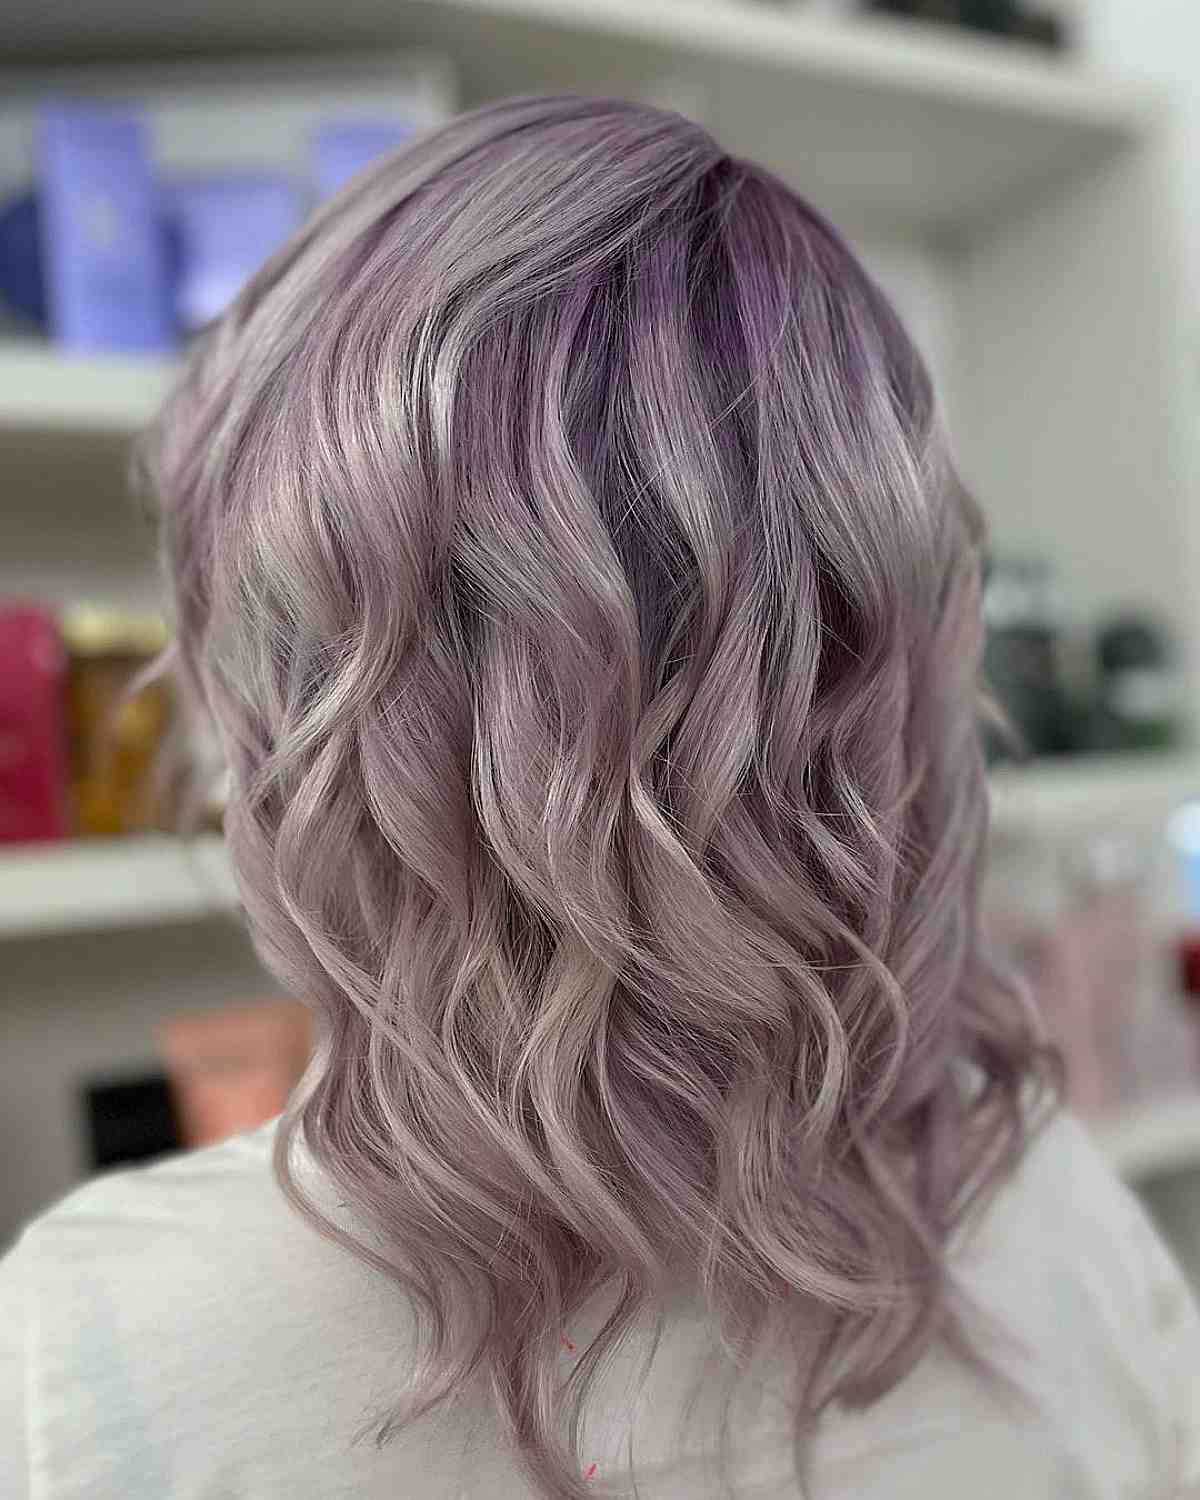 Pastel Dreams: Achieving Soft And Subtle Hair Shades